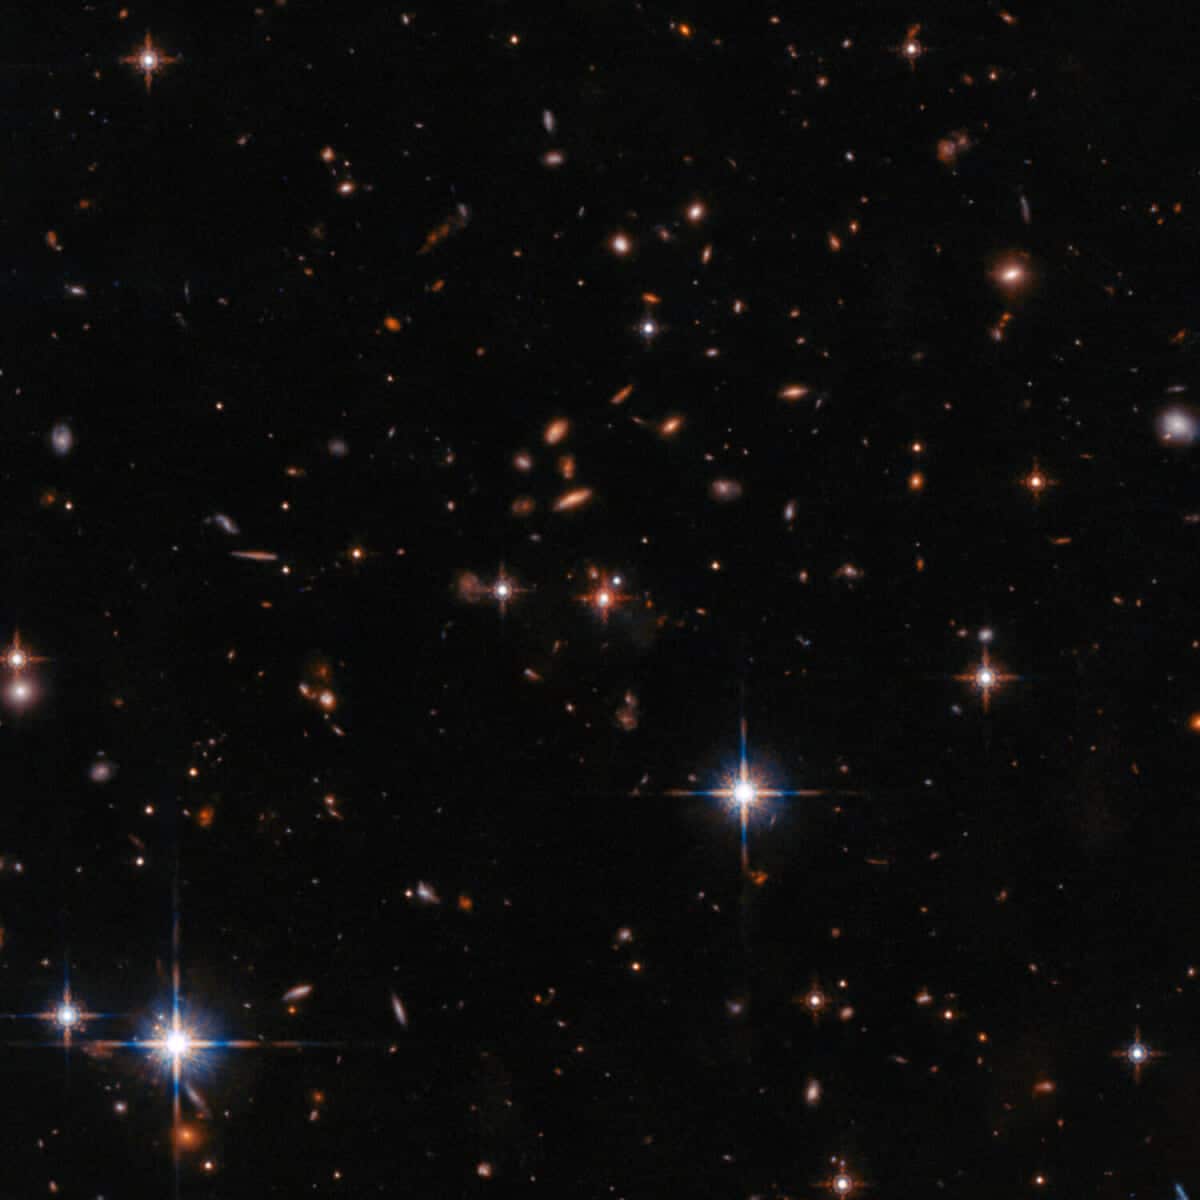 Wide field Hubble view of extremely red quasar SDSS J165202.64 172852.3